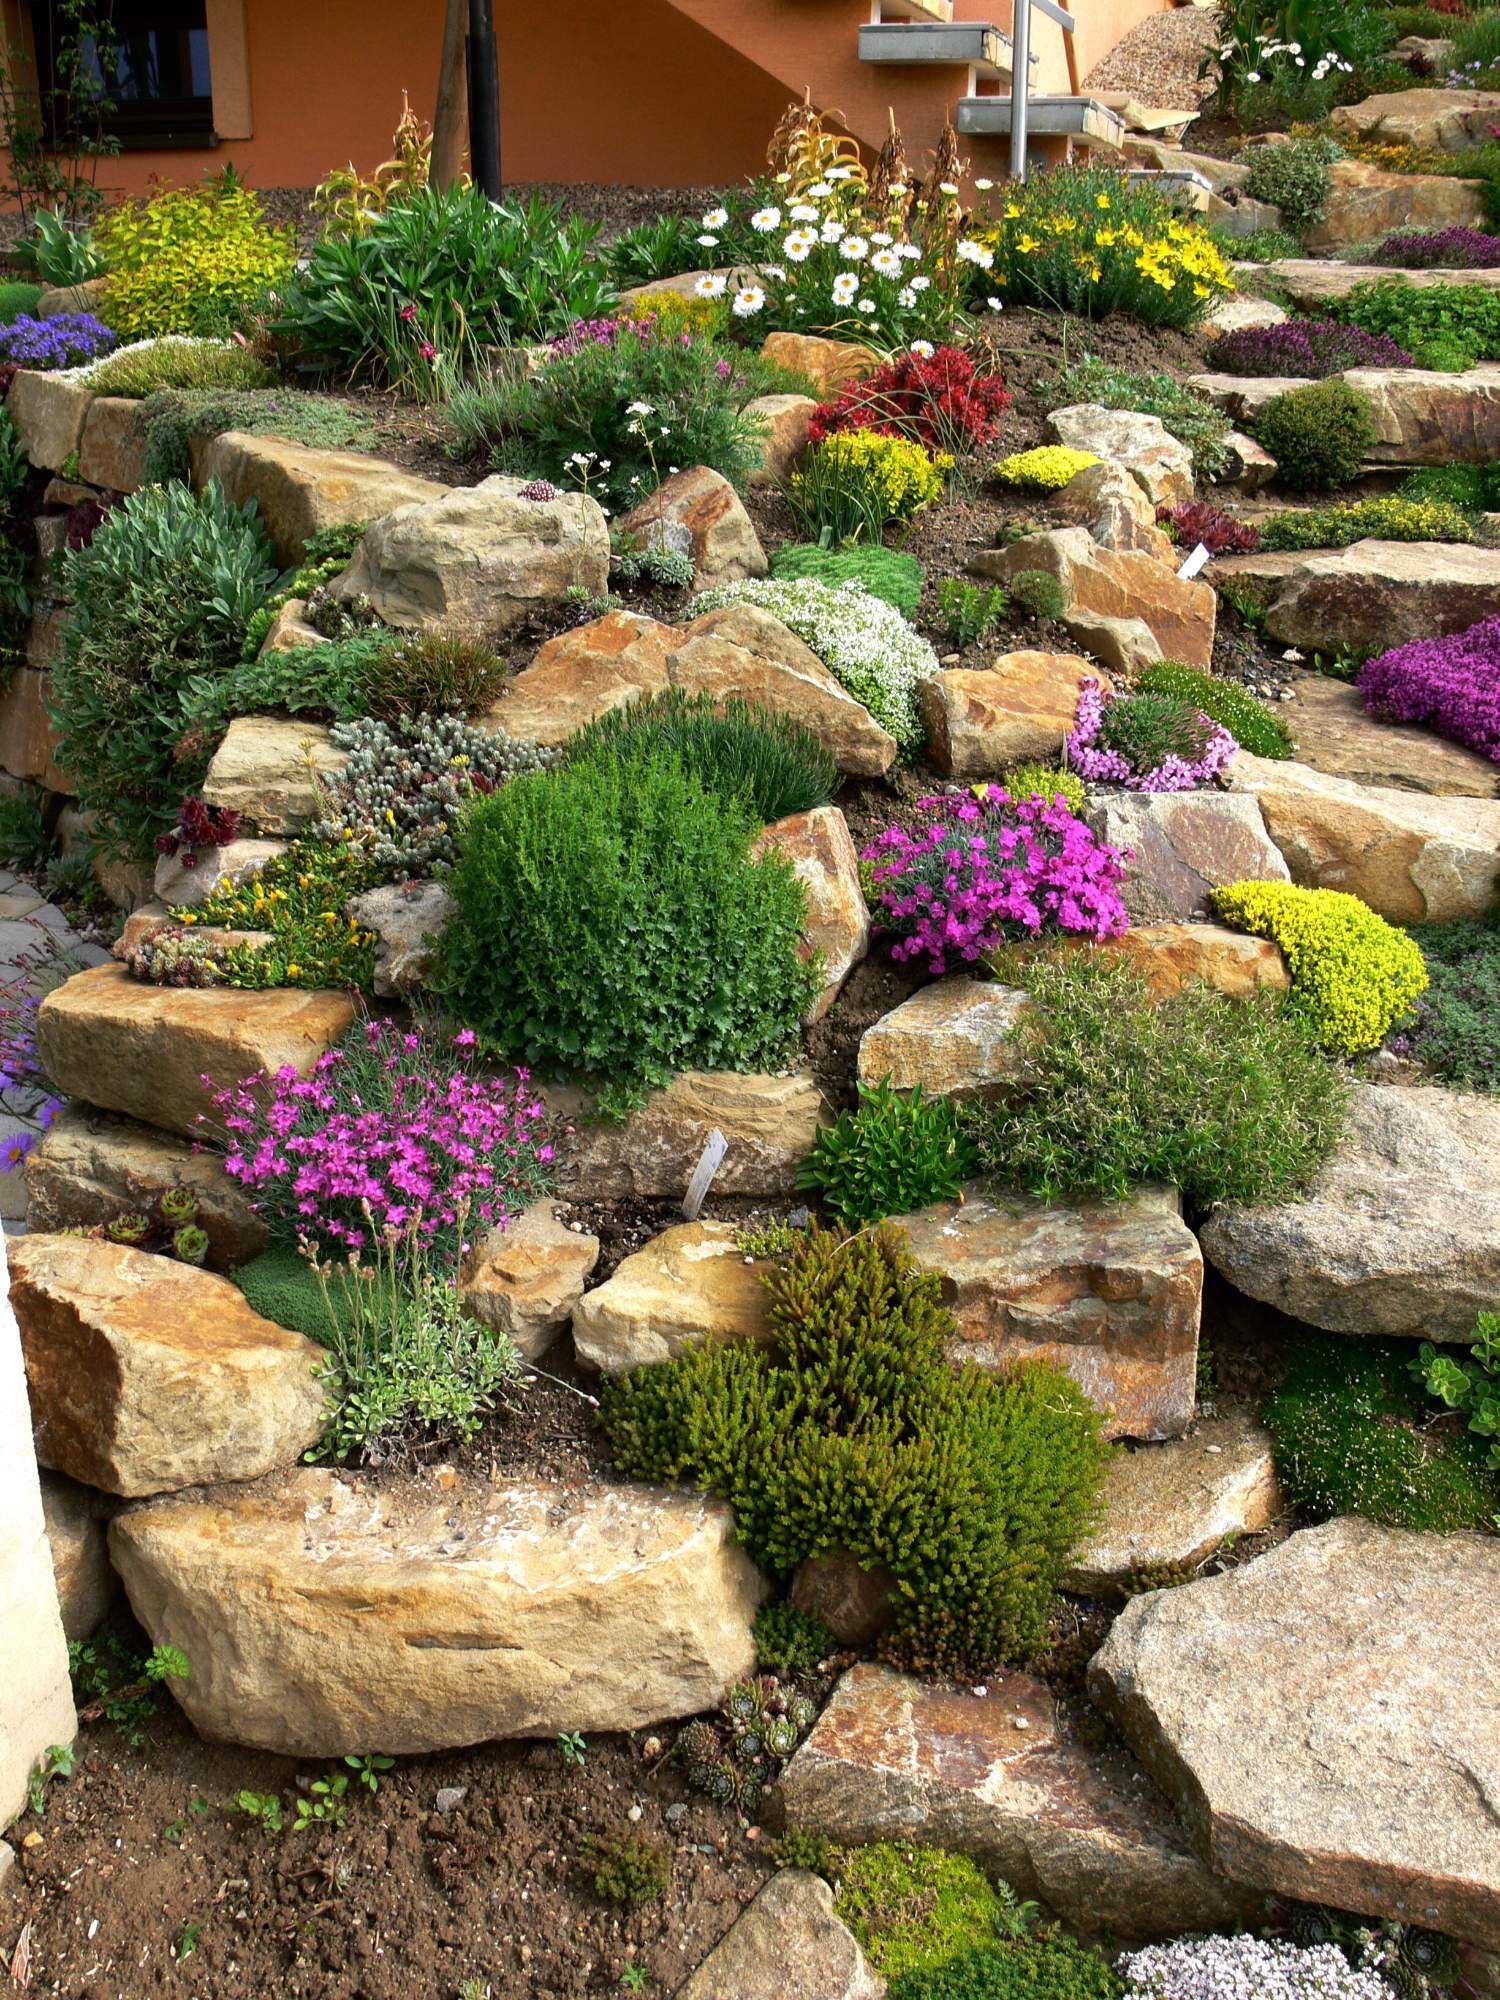 Enhance Your Landscape with Stunning Rock Gardens